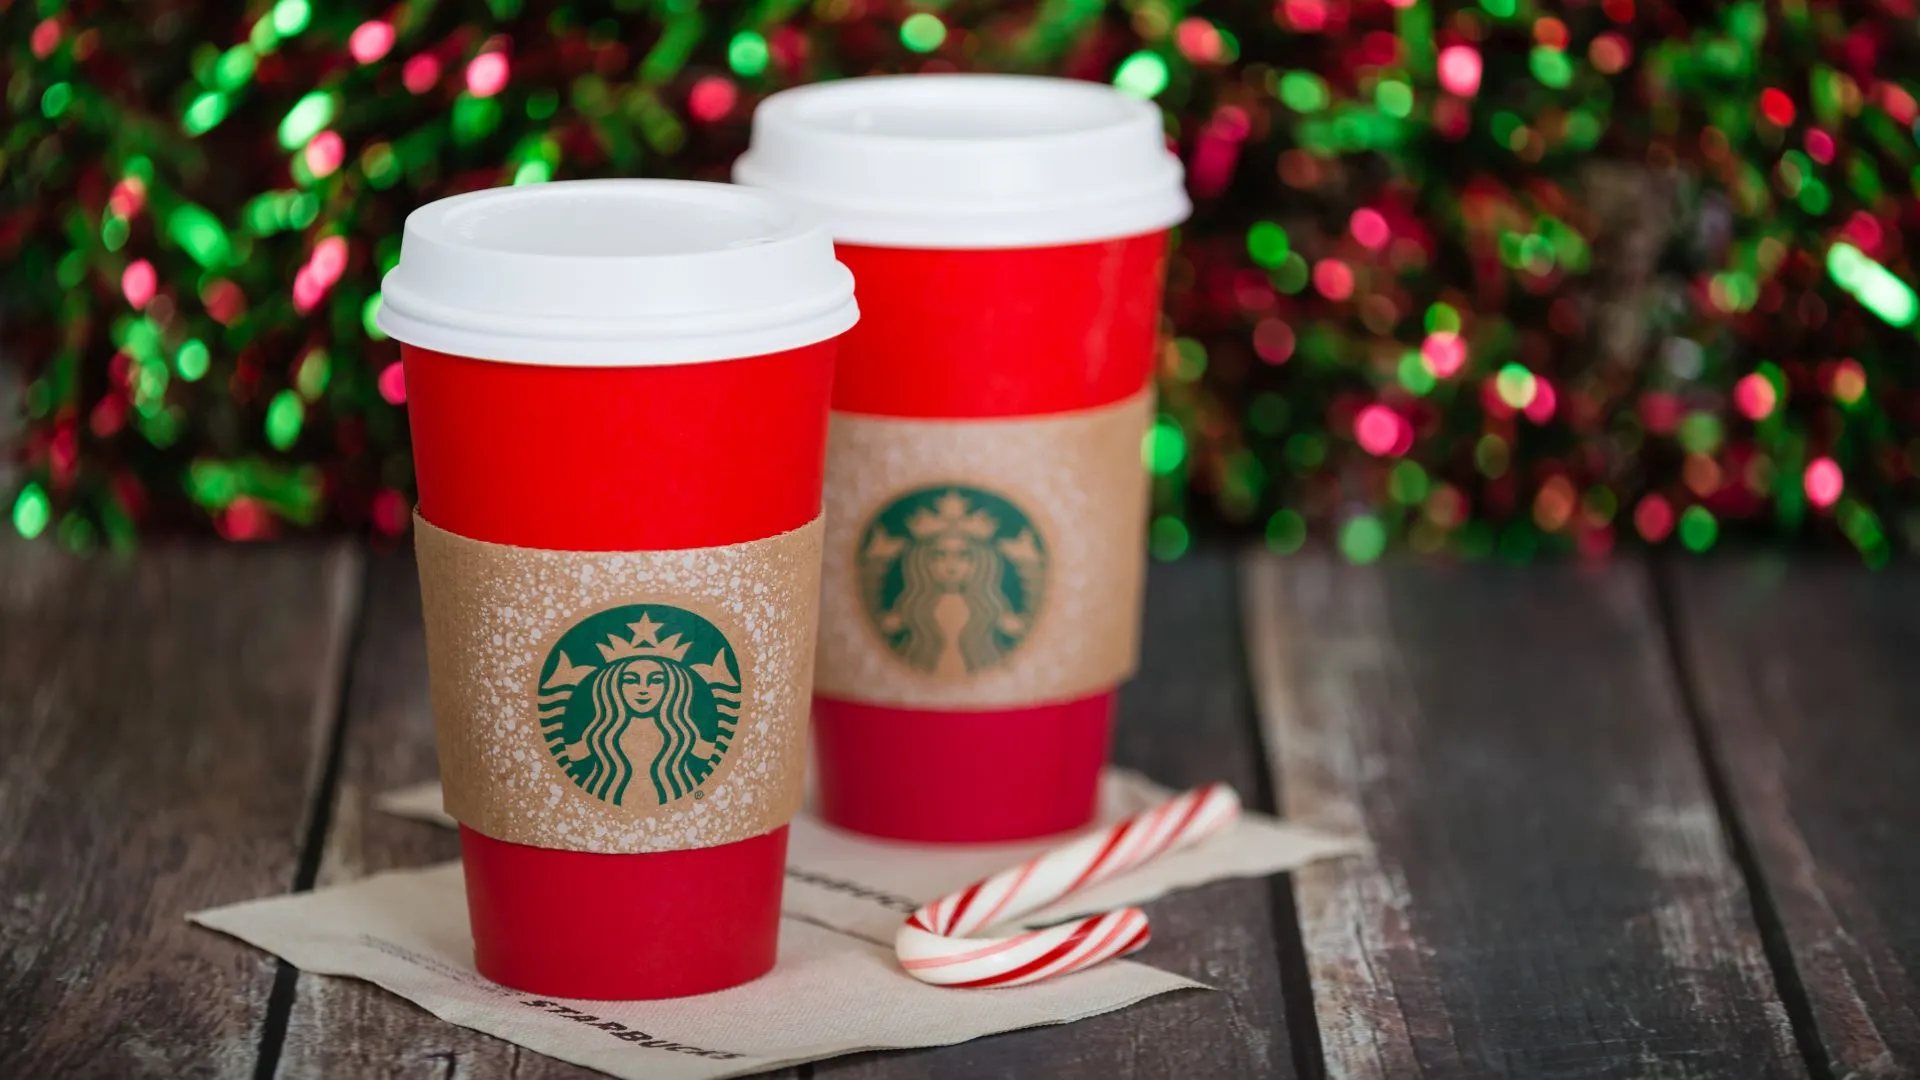 Dallas, TX, USA - November 21, 2015: A cup of Starbucks popular holiday beverage, served in the new 2015 designed red holiday cup.